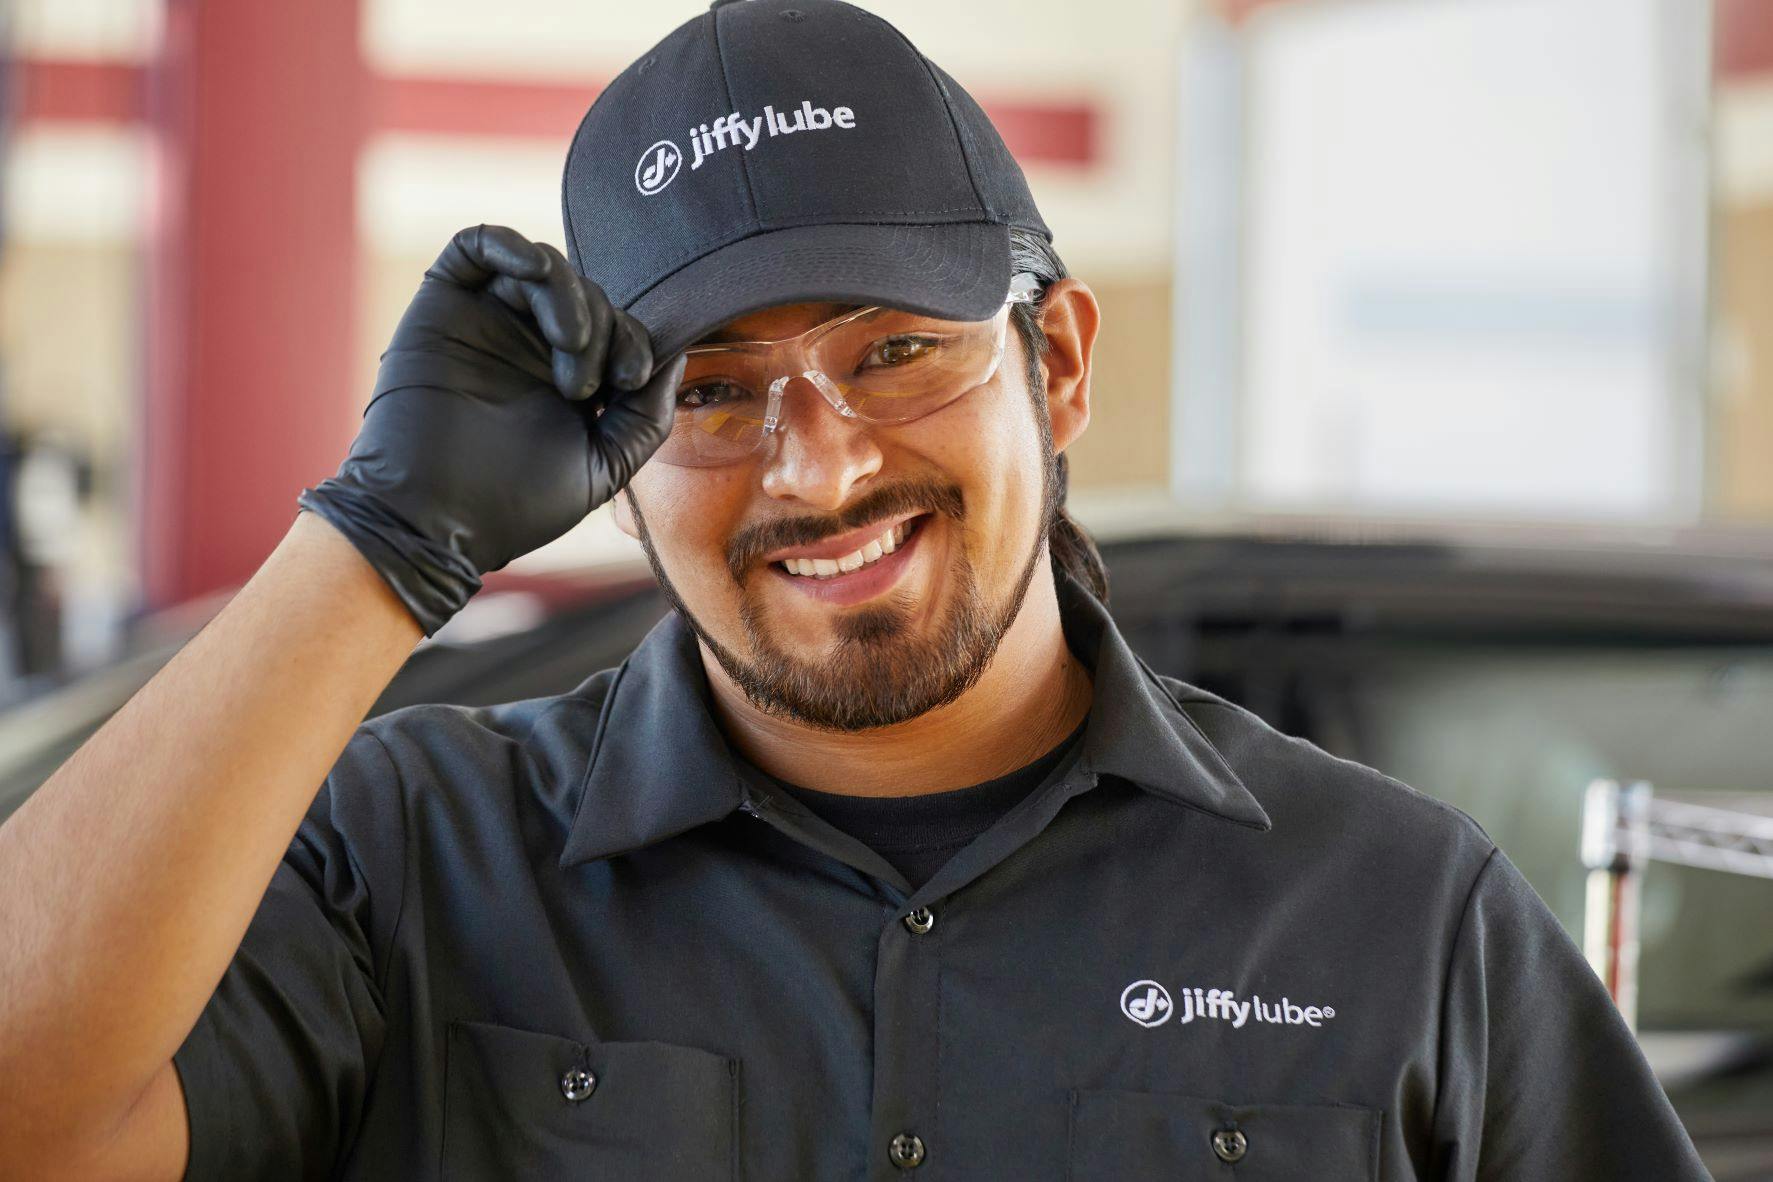 Jiffy Lube technician ready to conduct a tire inspection